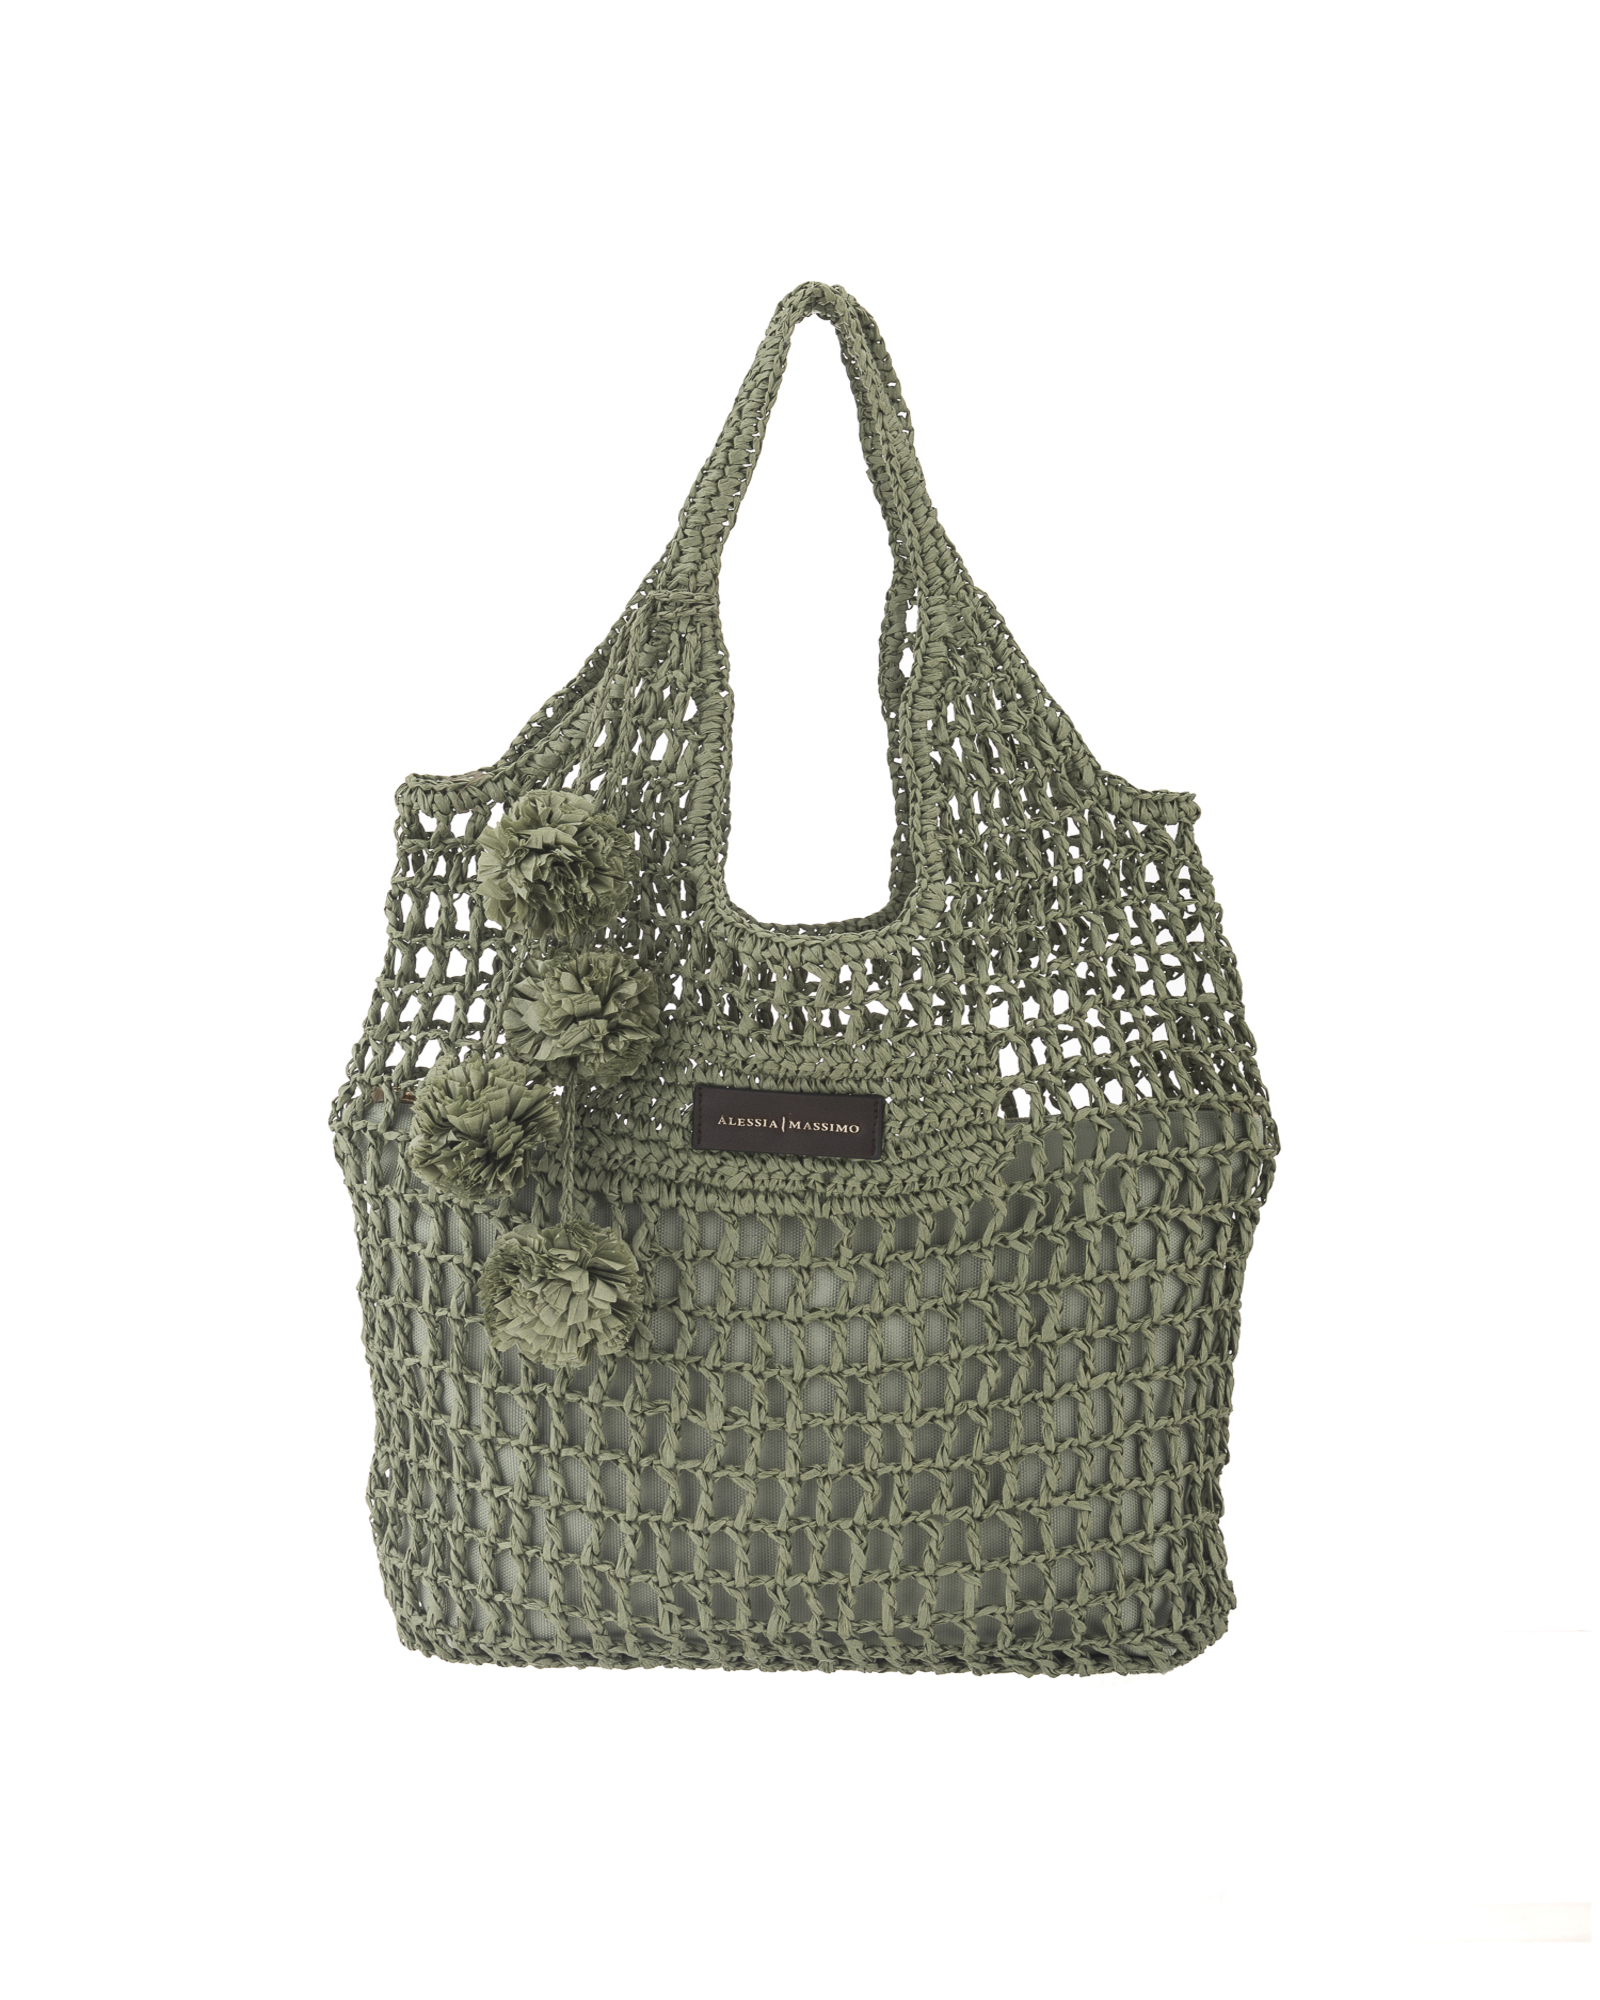 BAG MILITARY - STYLE8200